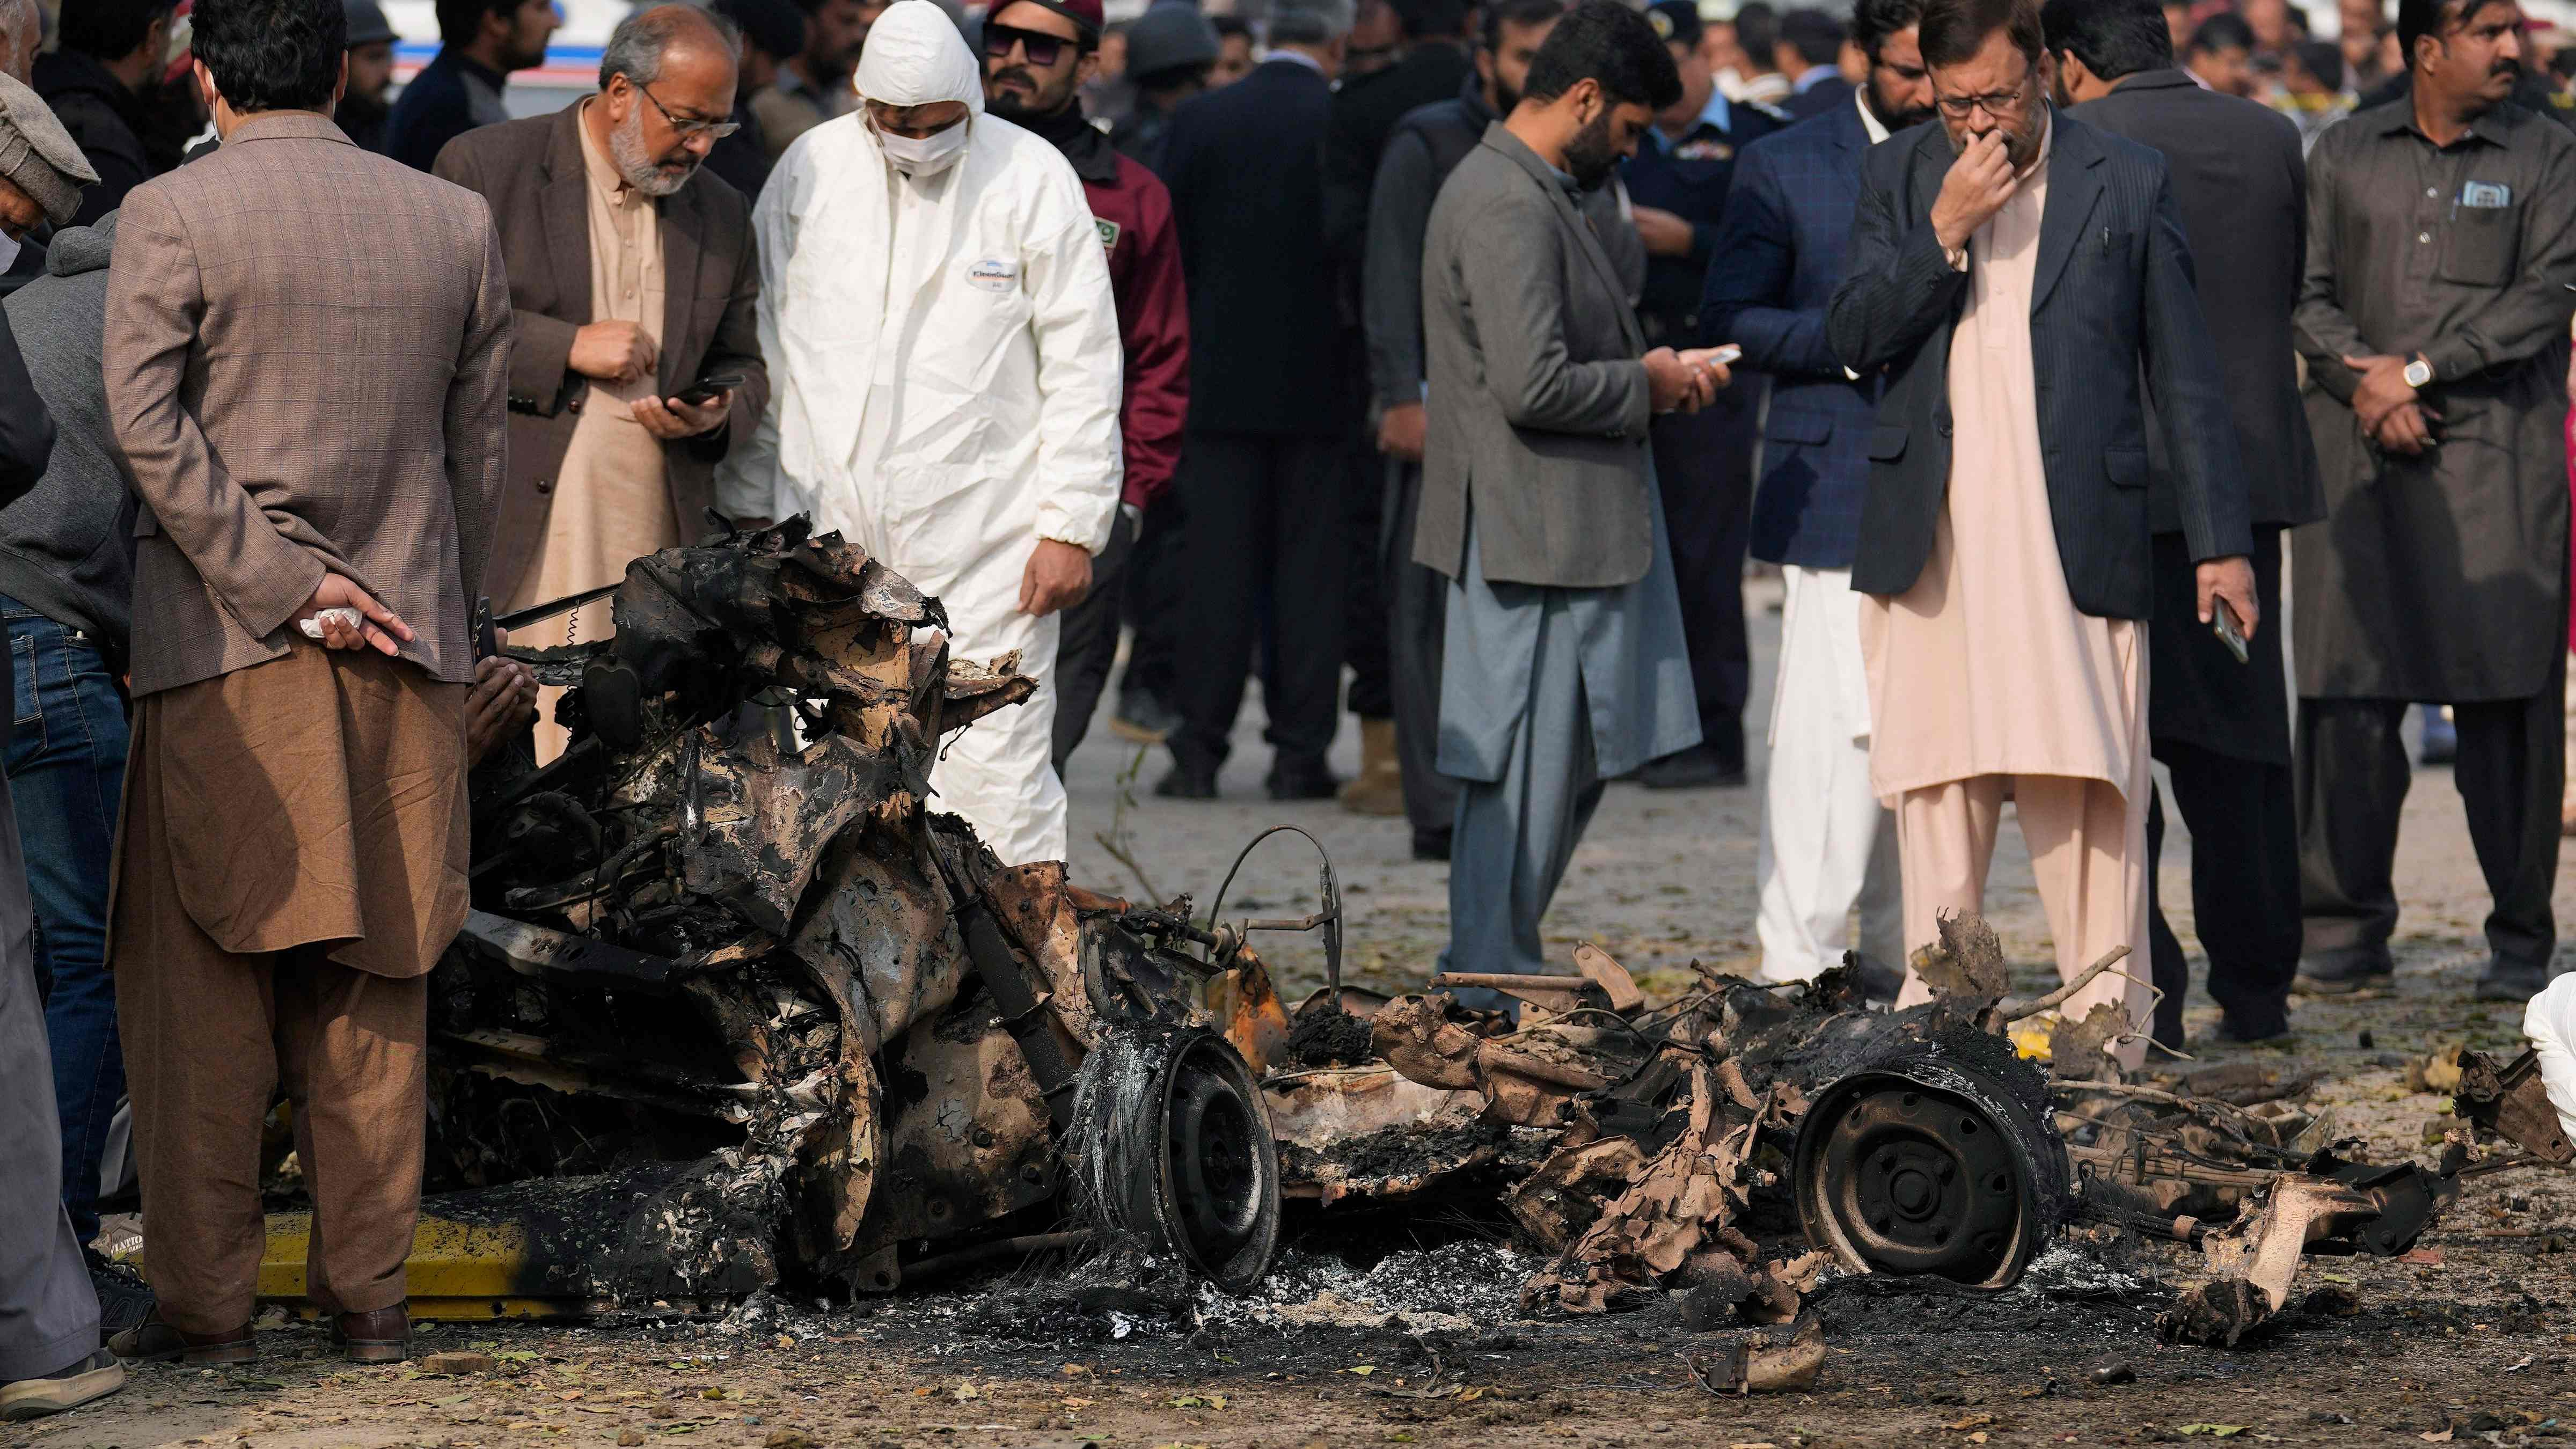 Investigators collect evidence from the wreckage of a car at the site of bomb explosion, in Islamabad, Pakistan. Credit: AP/PTI Photo